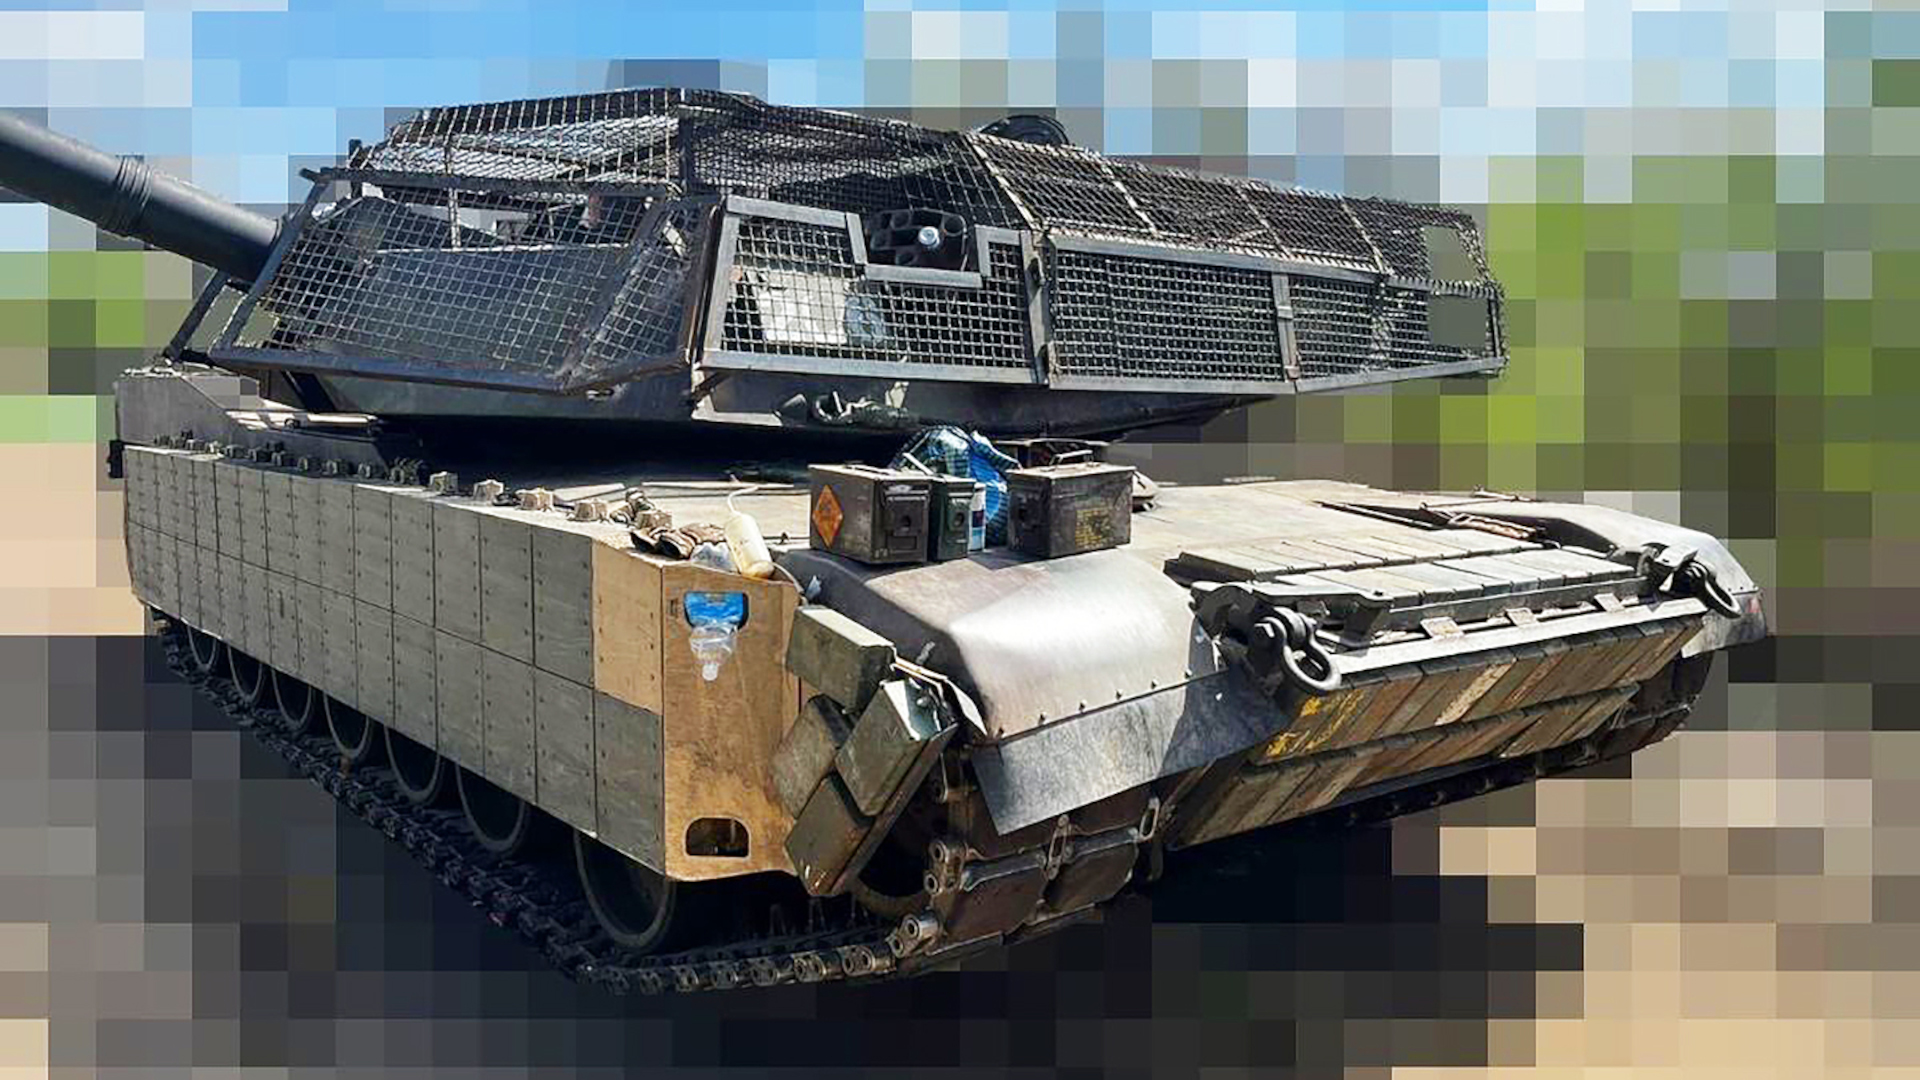 Ukrainian Abrams tanks are emerging with new factory-standard anti-drone "cope cage" armor screens and additional explosive reactive armor a month after they were reportedly pulled from the front lines due to drone threats.